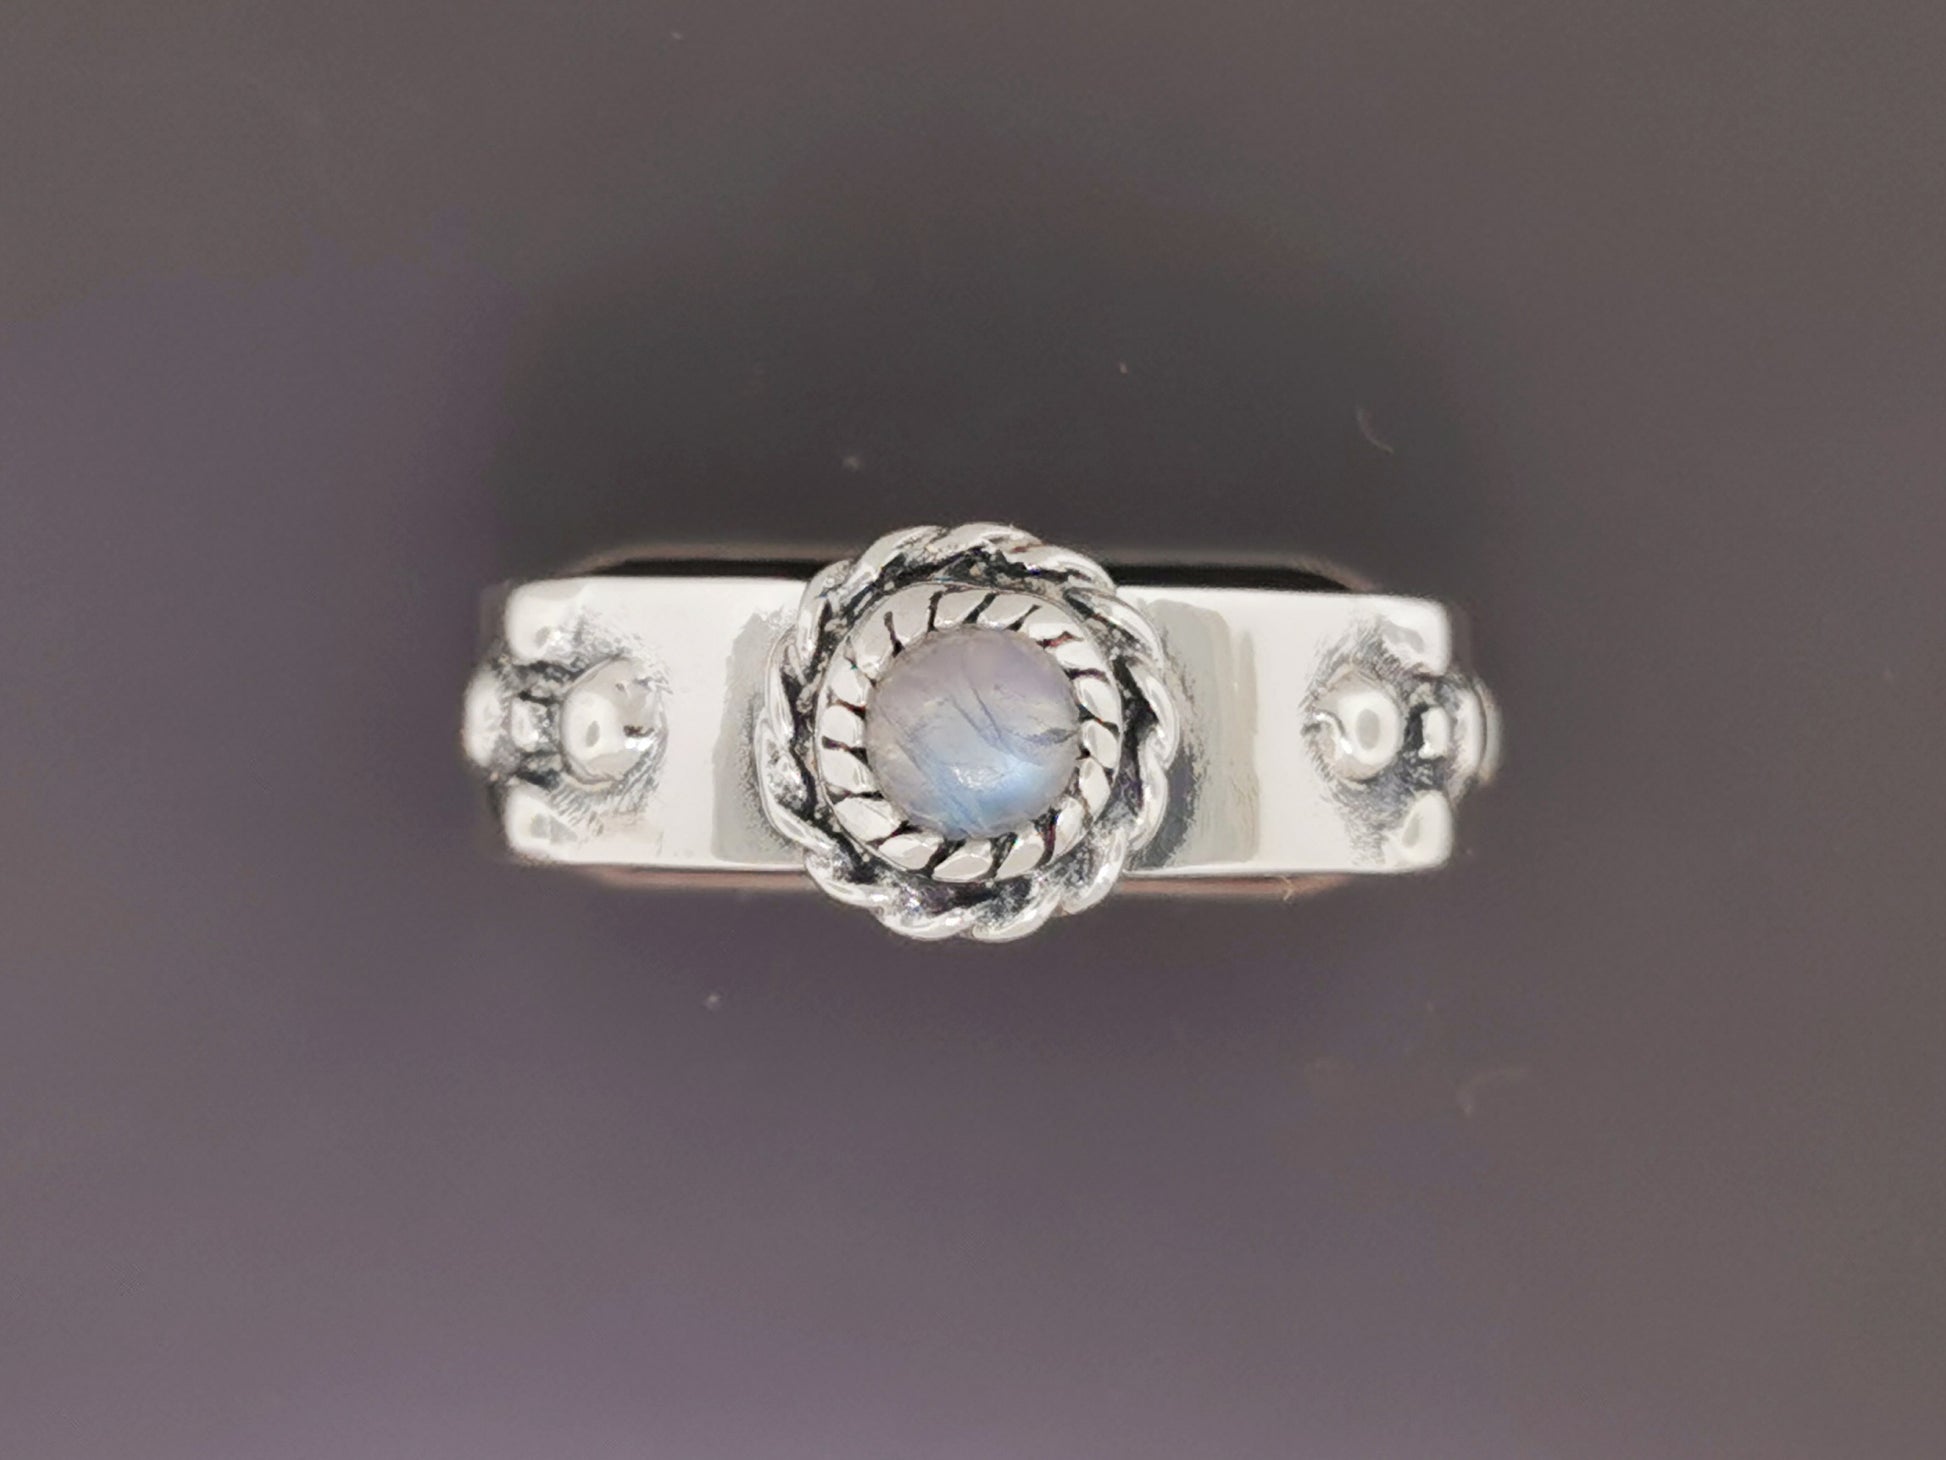 Howls Calcifer Fire Ring in Sterling Silver with Genuine Gemstone, Howls Moving Castle Ring, Howl and Sophie Rings, Silver Howls Moving Castle Ring, Calcifer Silver Ring, Gemstone Engagement Ring, Howls Moving Castle Ring with genuine moonstone